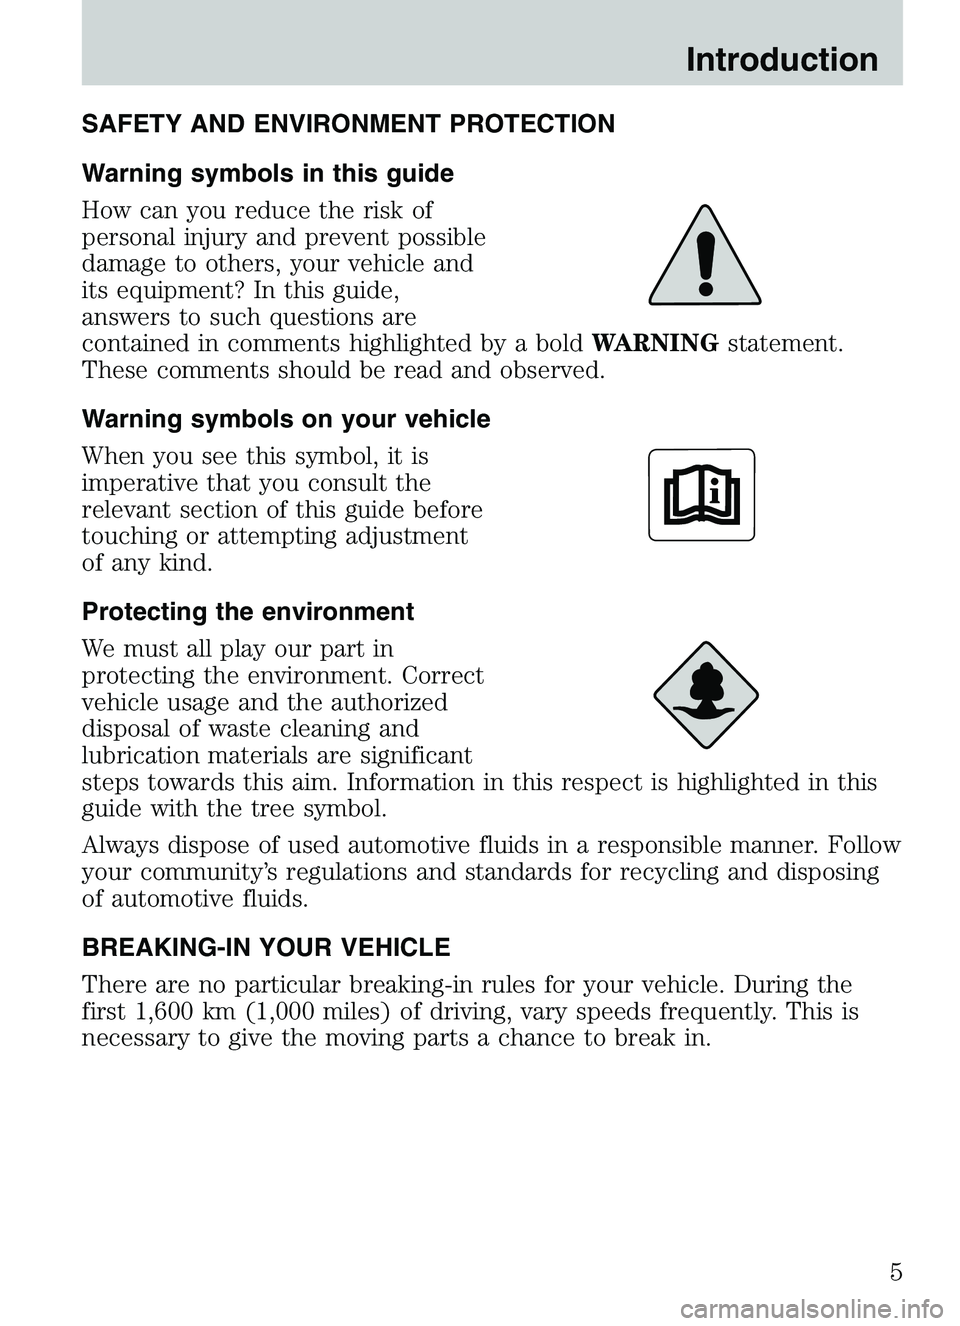 MAZDA MODEL B4000 2003  Owners Manual SAFETY AND ENVIRONMENT PROTECTION
Warning symbols in this guide
How can you reduce the risk of
personal injury and prevent possible
damage to others, your vehicle and
its equipment? In this guide,
ans